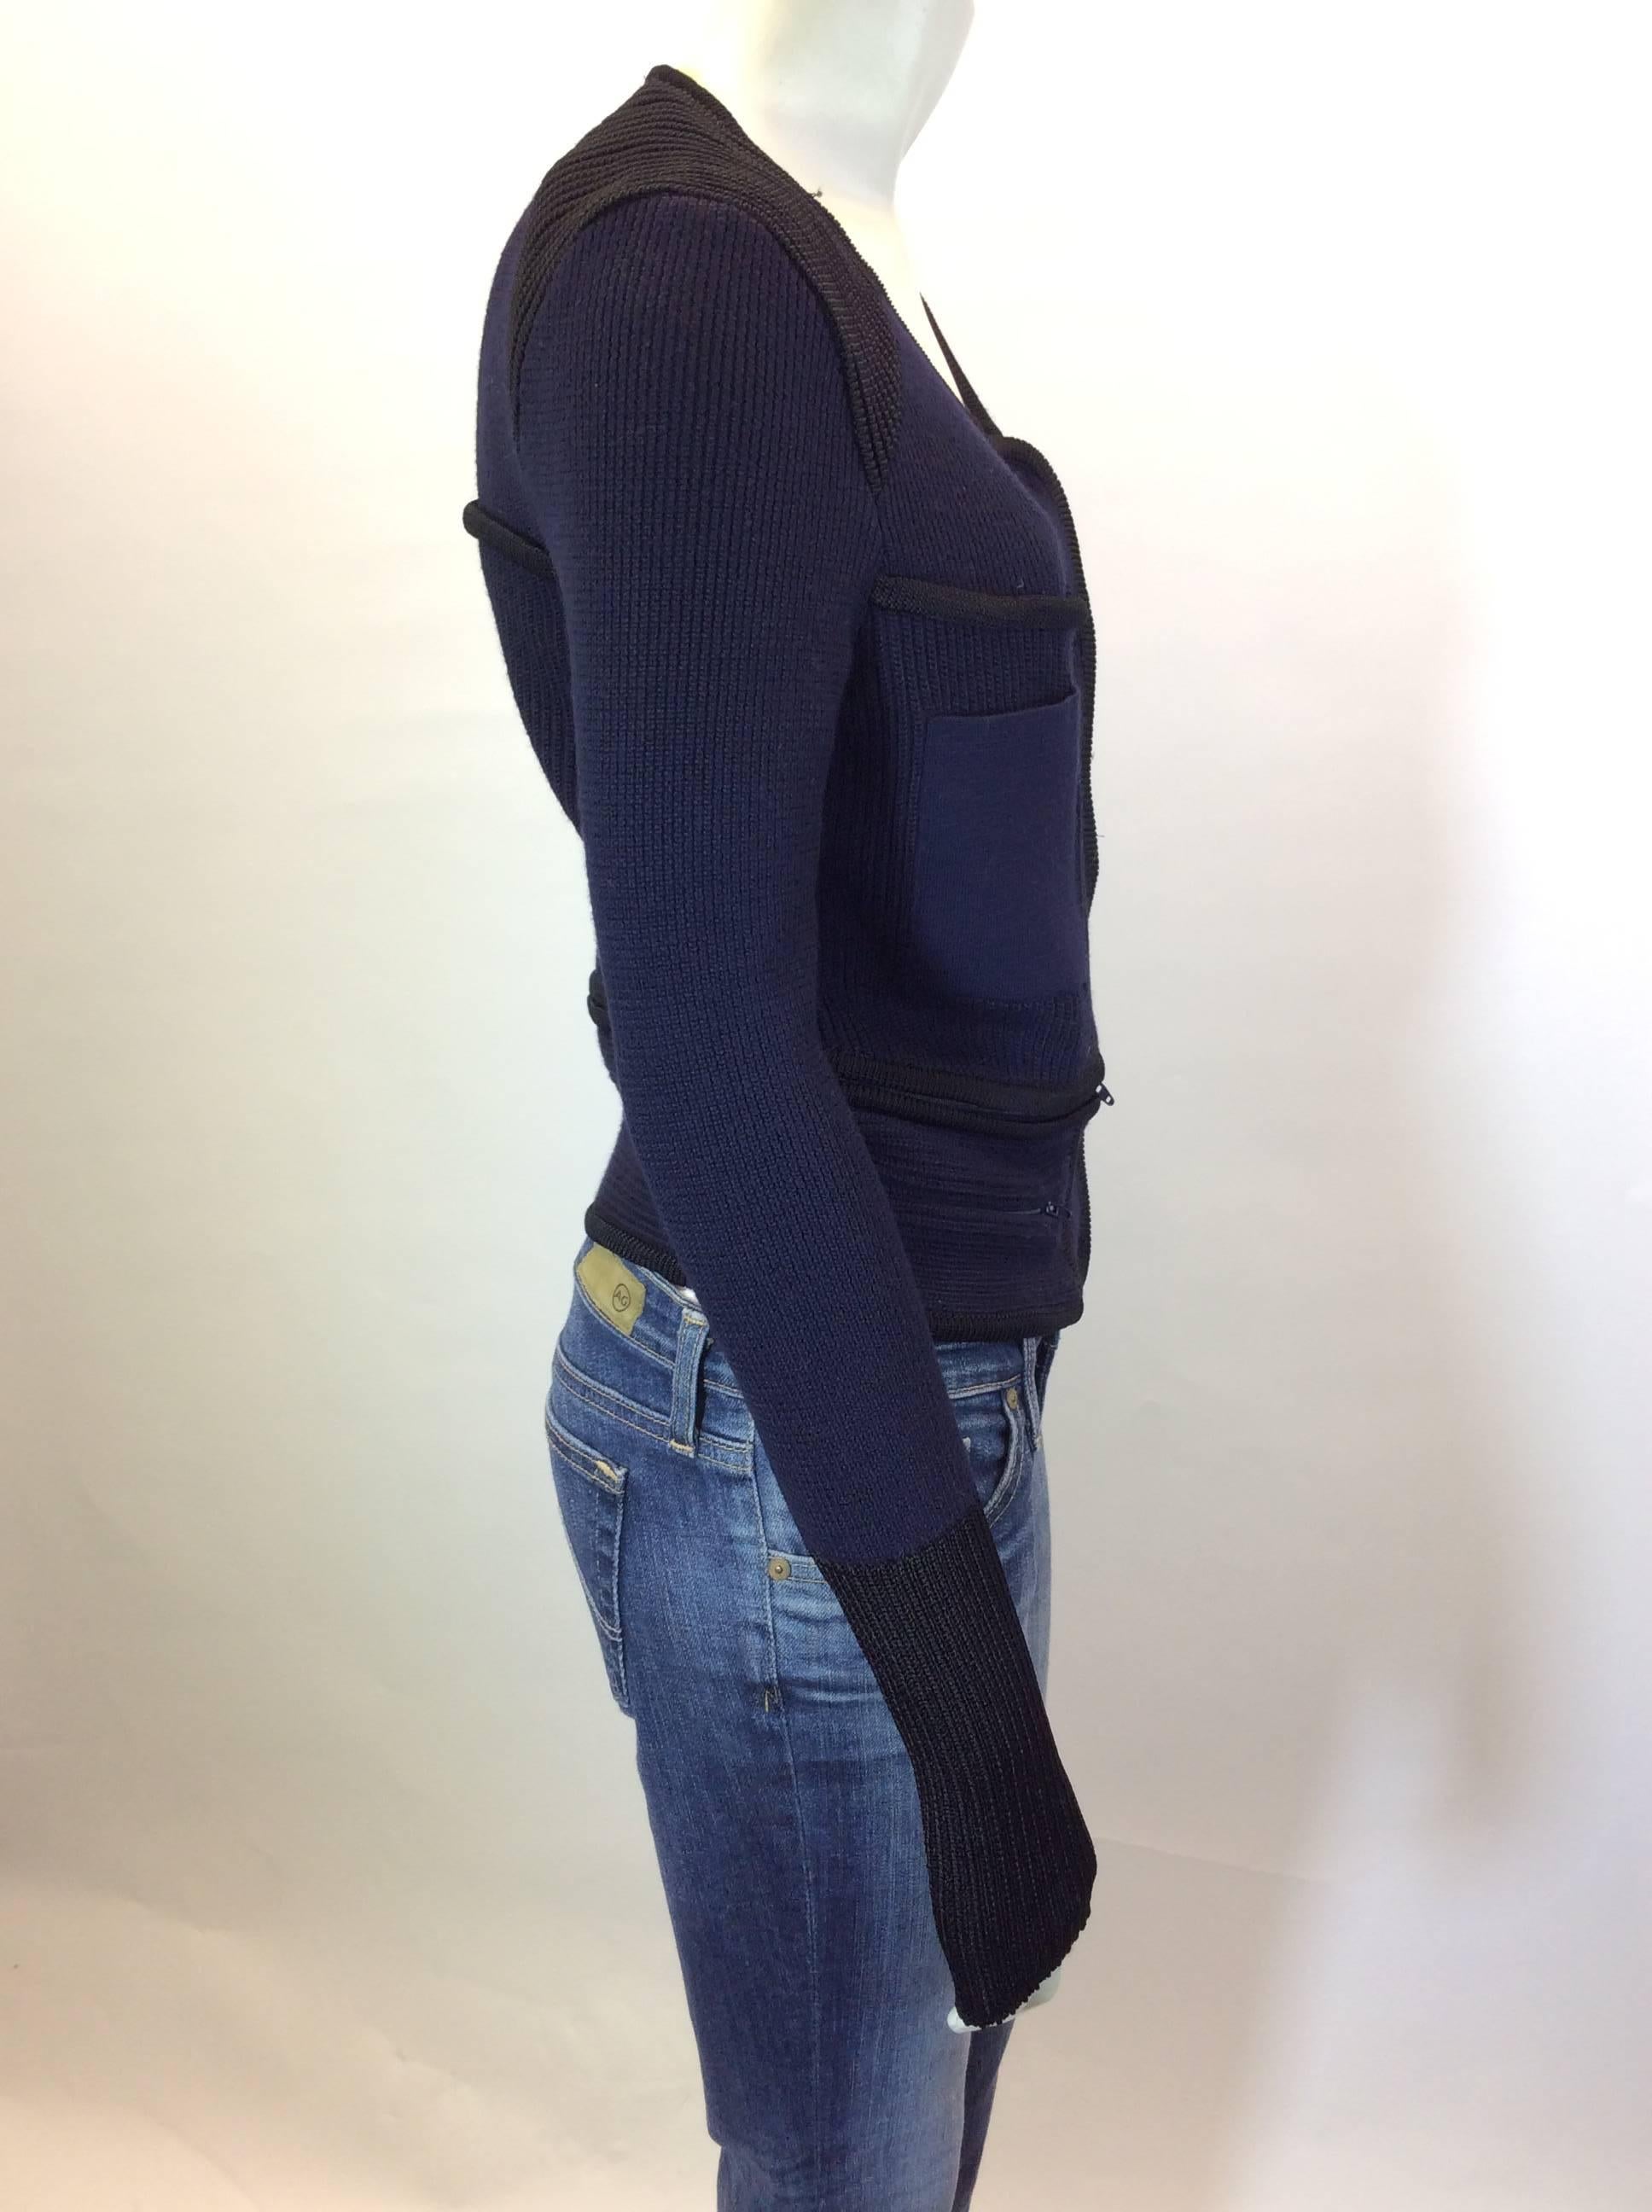 Isabel Marant Navy and Black Cardigan with Removable Piece In Excellent Condition For Sale In Narberth, PA